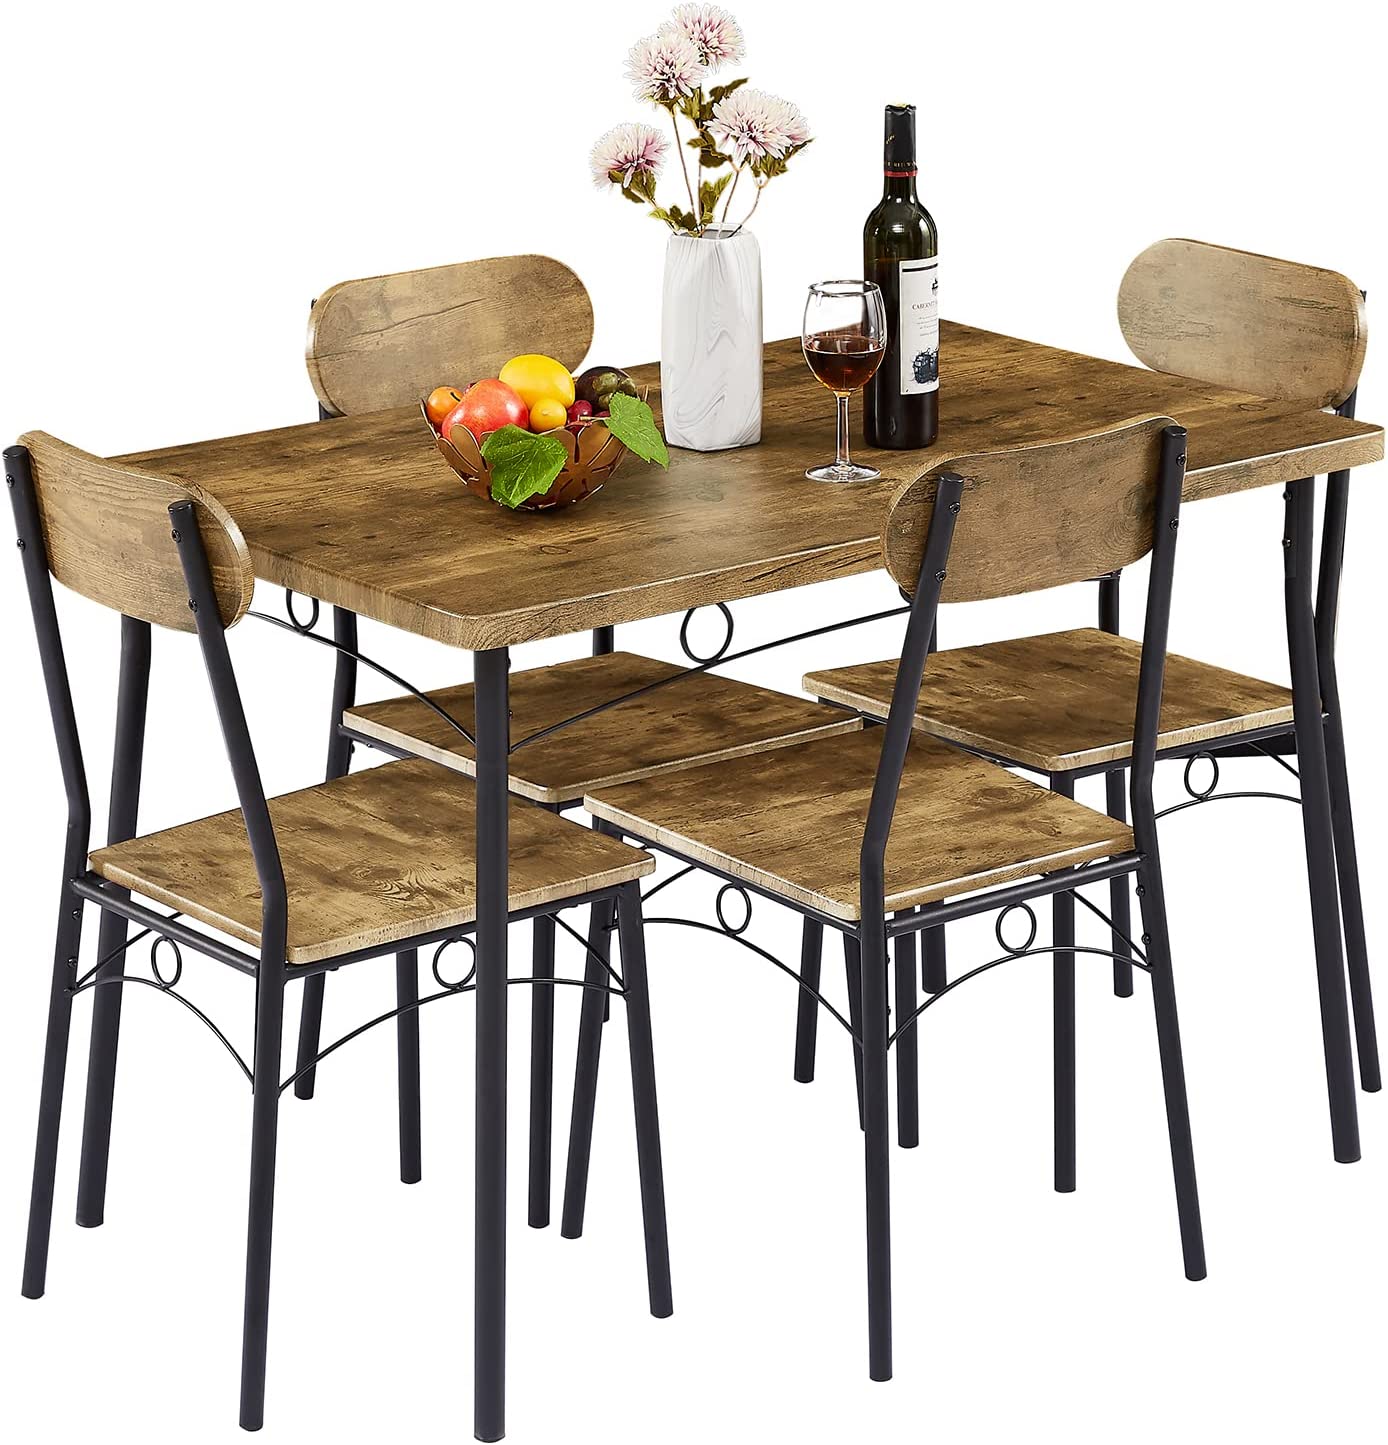 VECELO 5 Piece Dining Table Set Metal and Wood Rectangular Table with 4 Chairs for Breakfast Nook